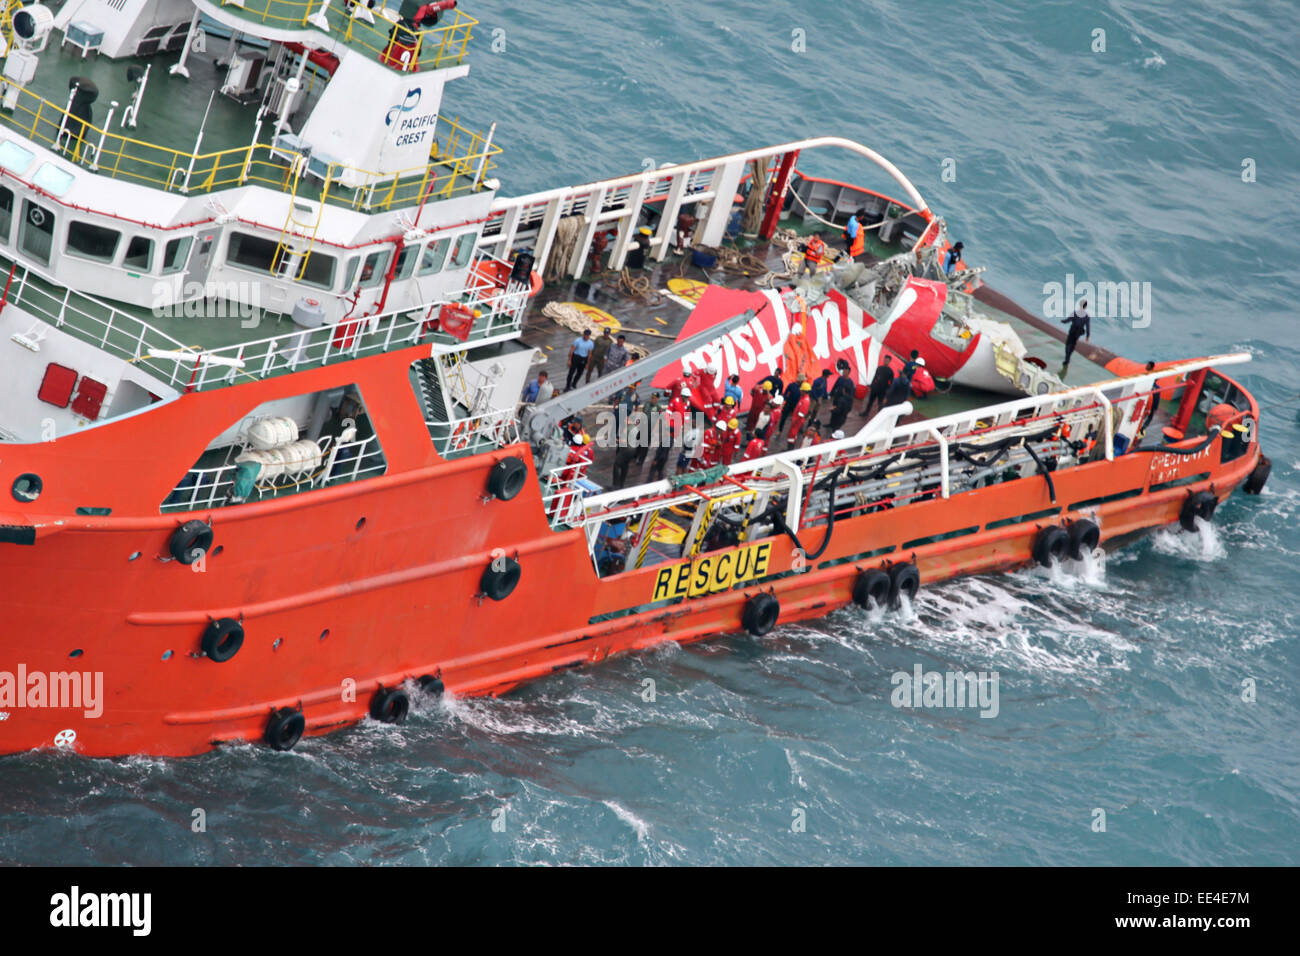 Offshore supply ship the Crest Onyx holds the tail section of Air Asia flight 8501 after recovering the piece from the sea floor January 12, 2015 in the Java Sea. Stock Photo